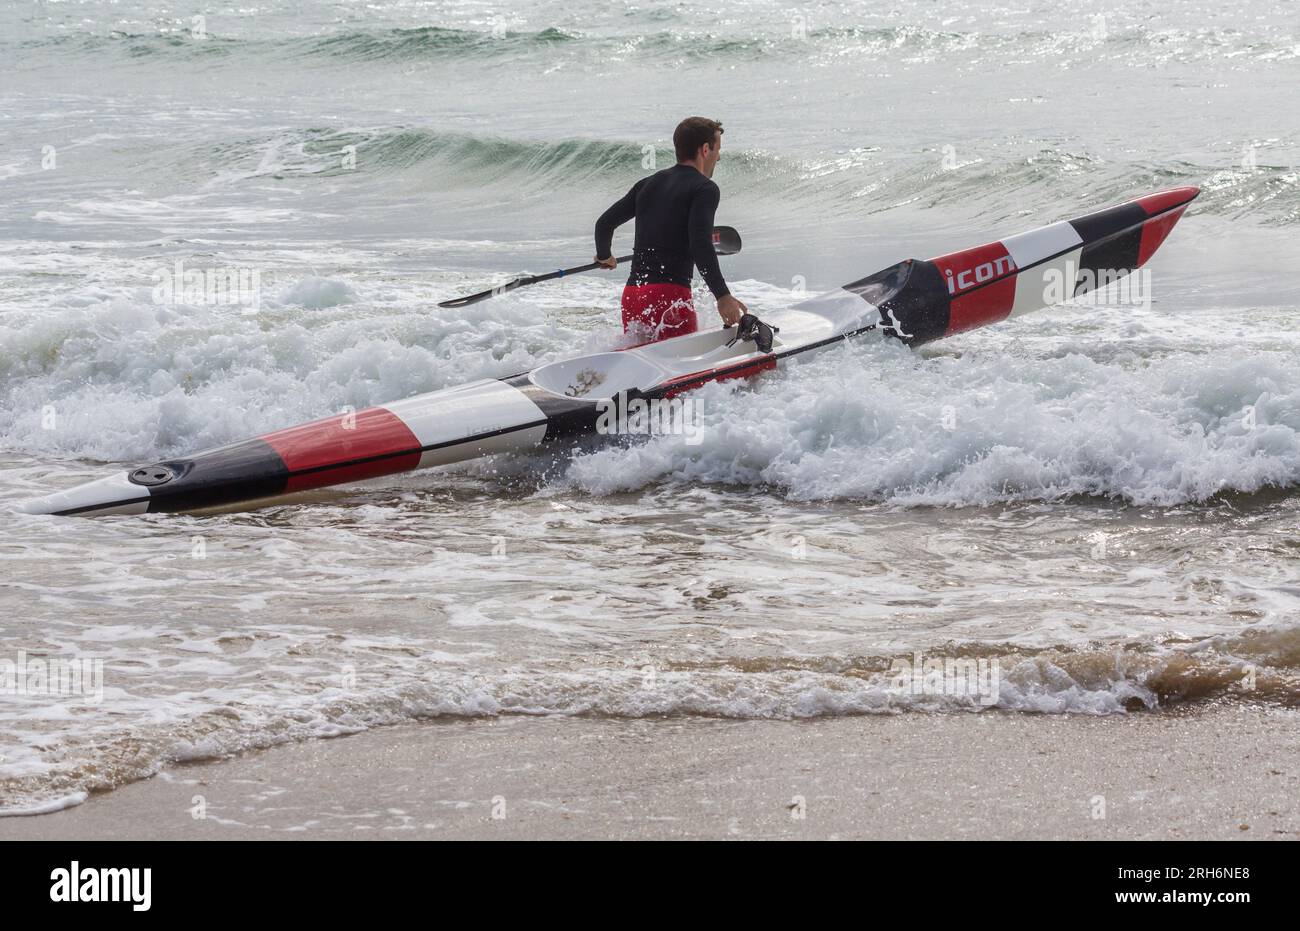 Man getting surfski surf ski ready in the sea to go surf skiing surfskiing at Branksome Chine beach, Poole, Dorset, UK in August Stock Photo